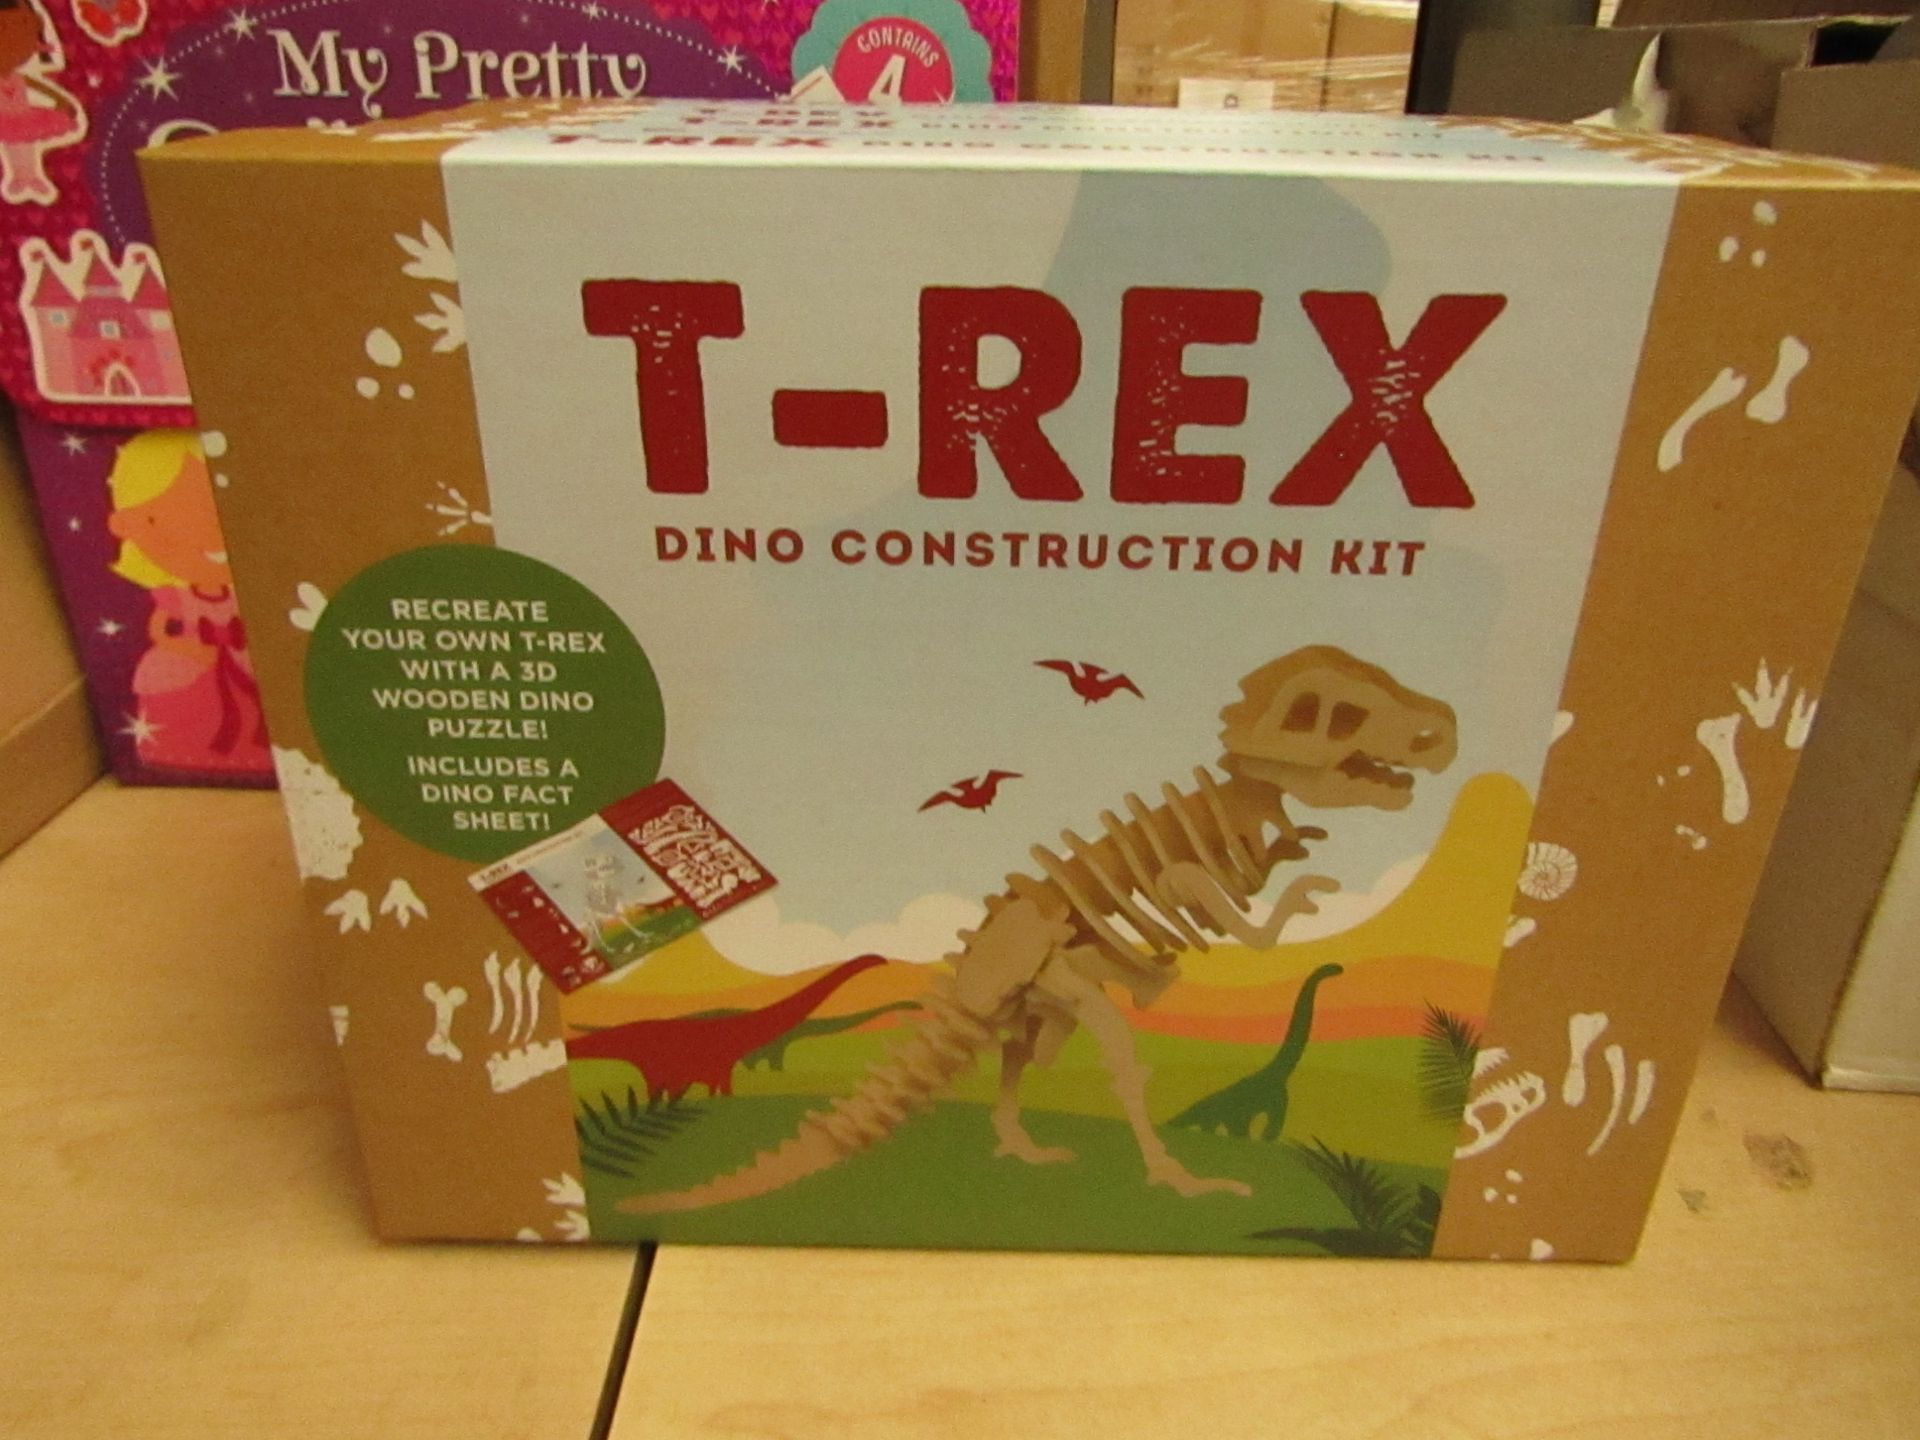 5x T-Rex Dino Contruction Kit (3D Wooden Dino Puzzle) - Packaged & Unchecked